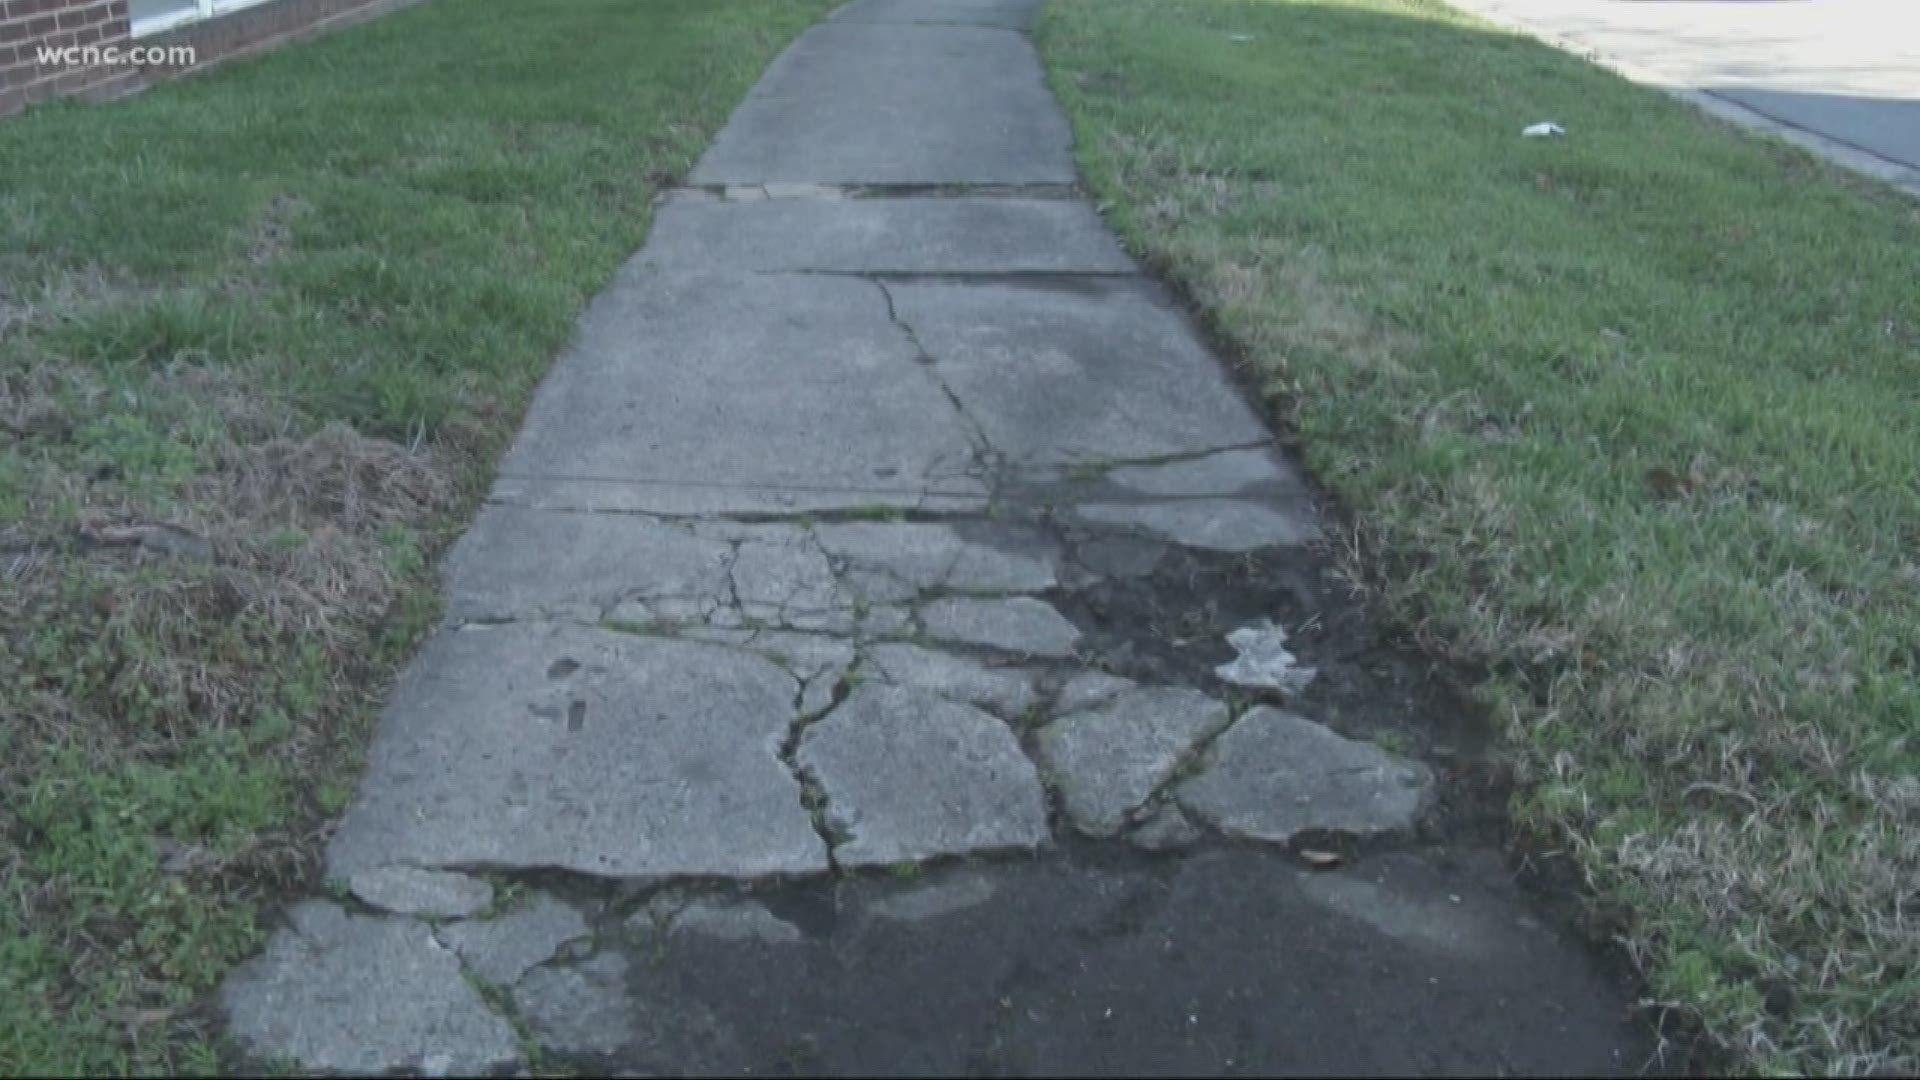 A petition is calling for major improvements to sidewalks in the area along The Plaza between Parkwood and Anderson.